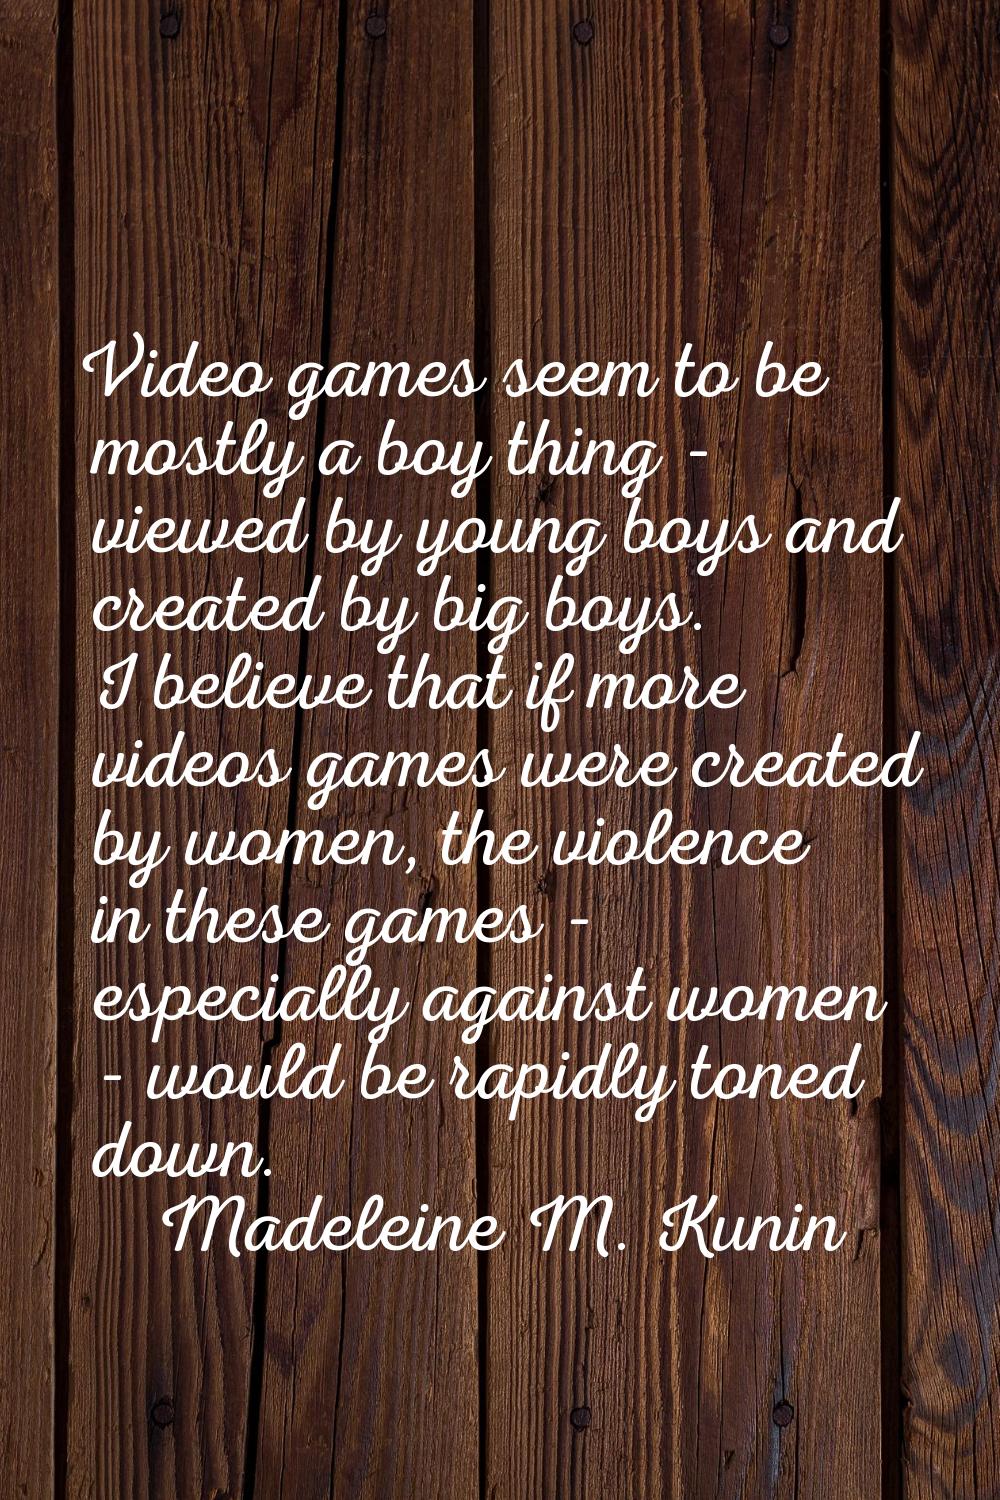 Video games seem to be mostly a boy thing - viewed by young boys and created by big boys. I believe